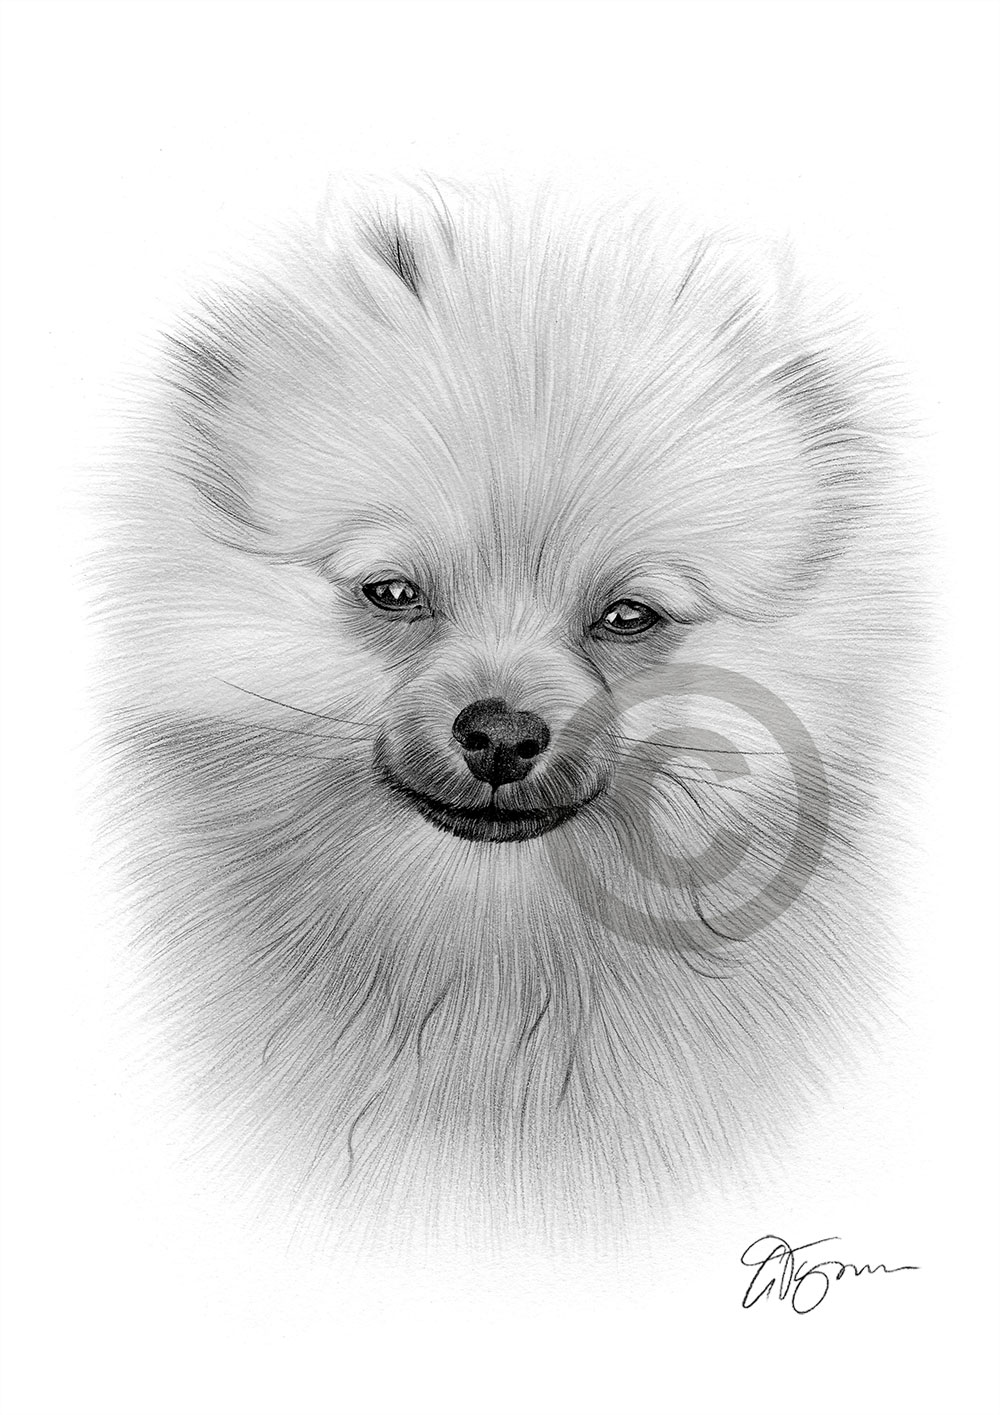 Pencil drawing of a young Pomeranian puppy by artist Gary Tymon